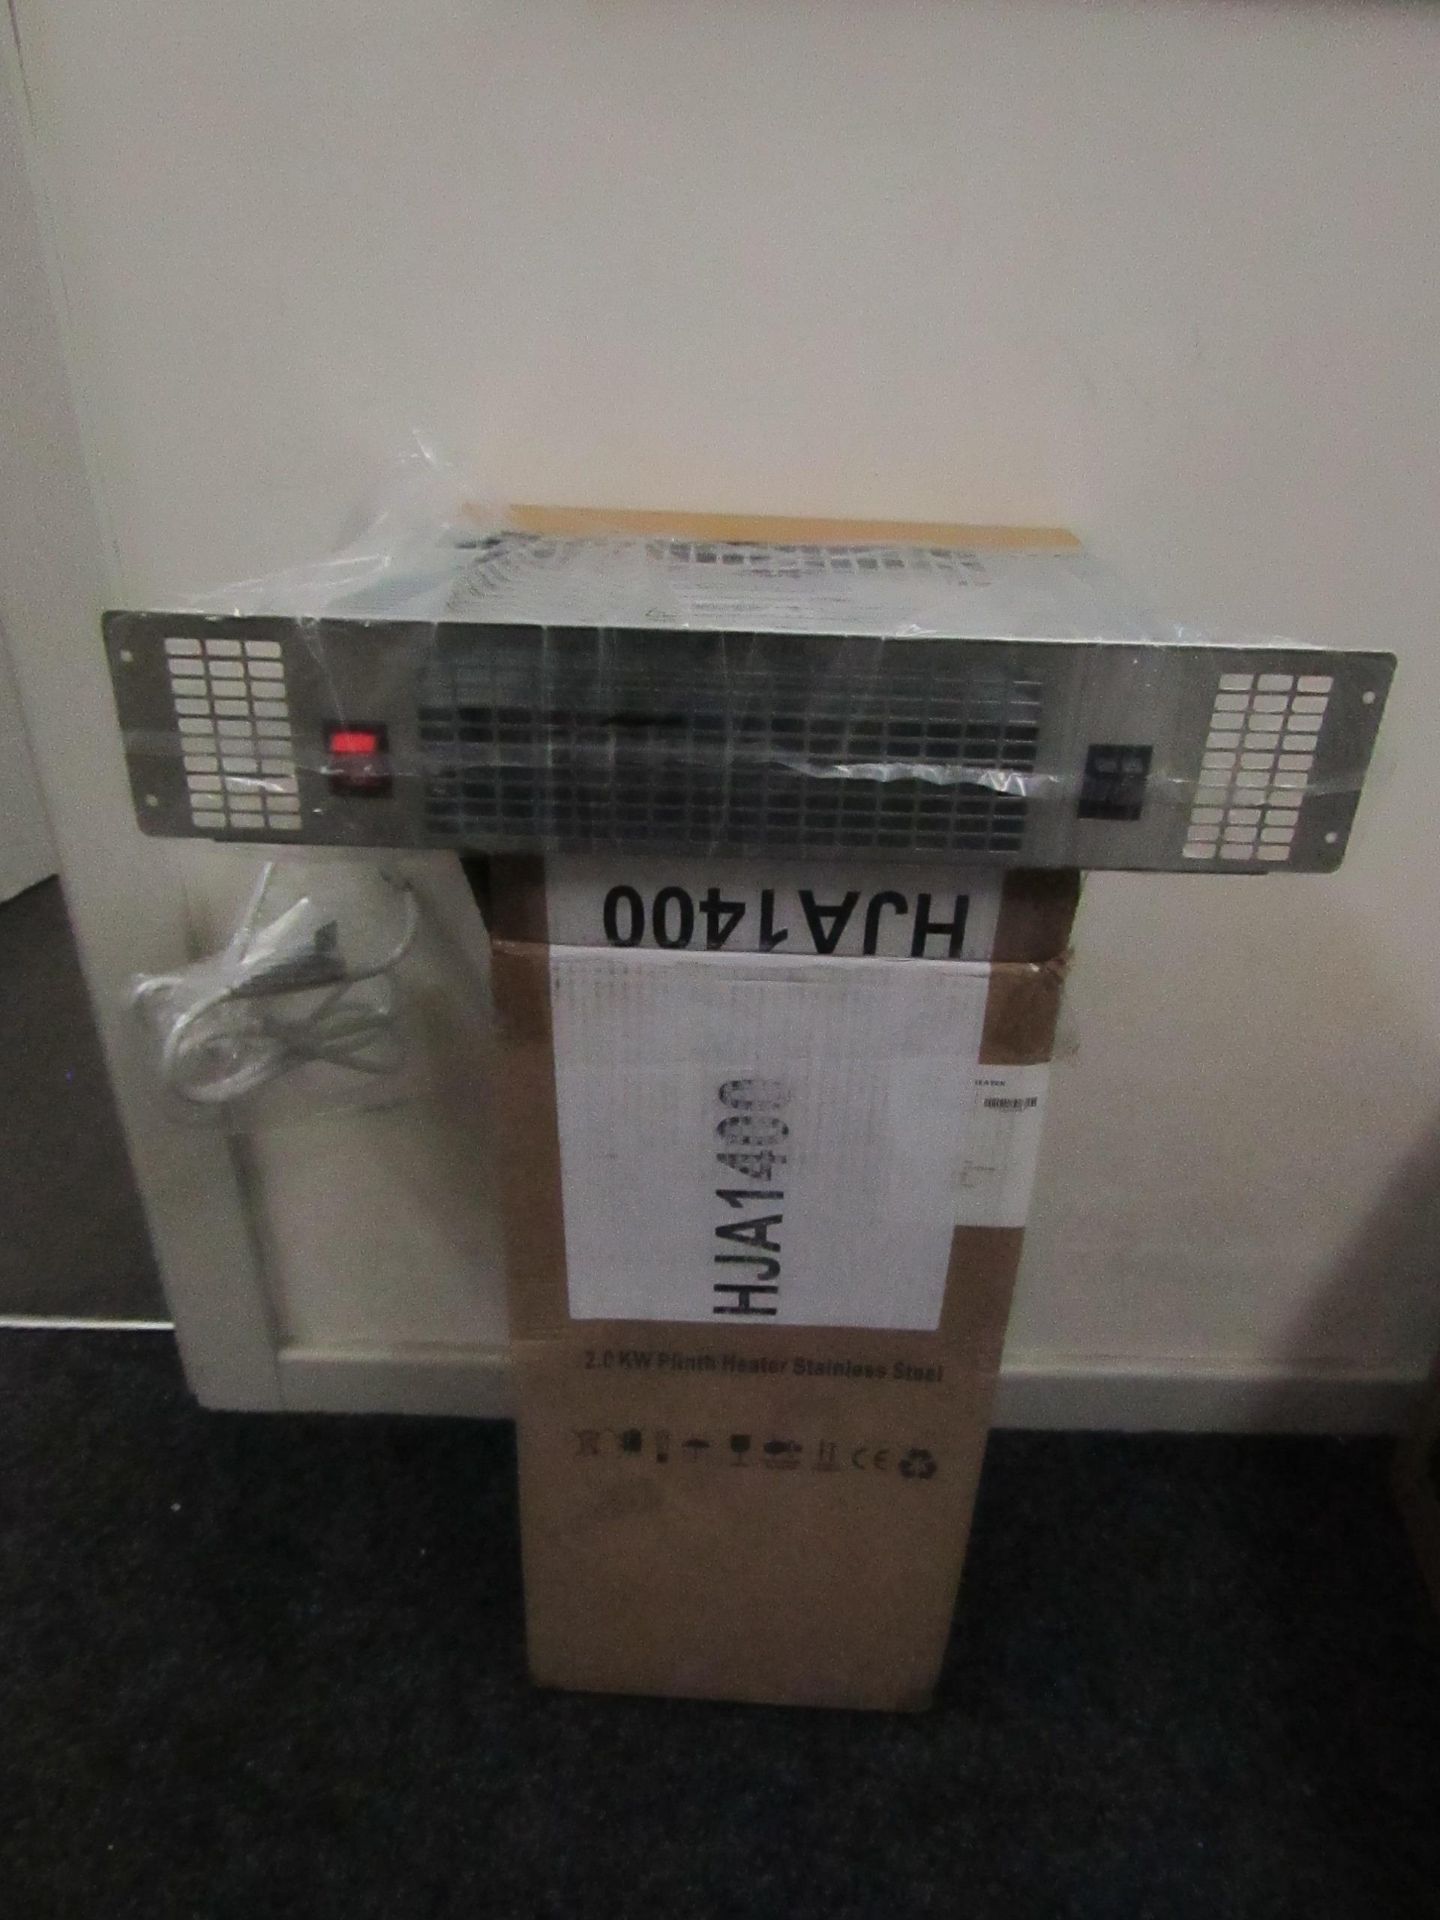 50x TCP UPH201SS PLINTH-MOUNTED FAN HEATER SILVER 2000W 500 X 100MM, new and boxed, Economic, - Image 3 of 3